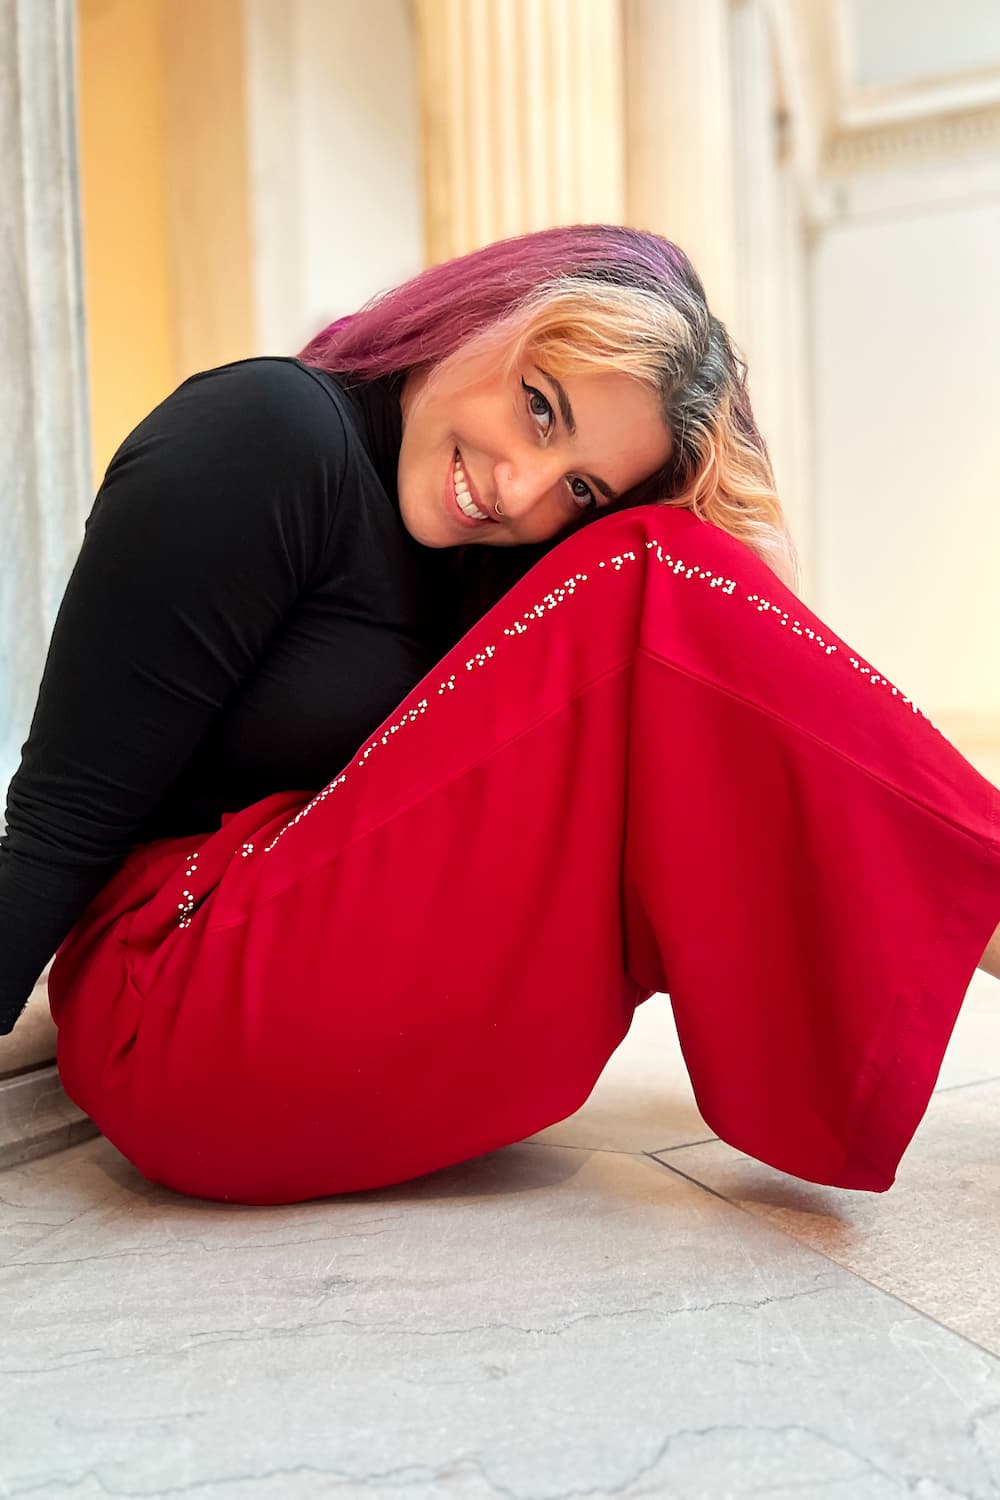 Model sitting with bent knees in the red pants